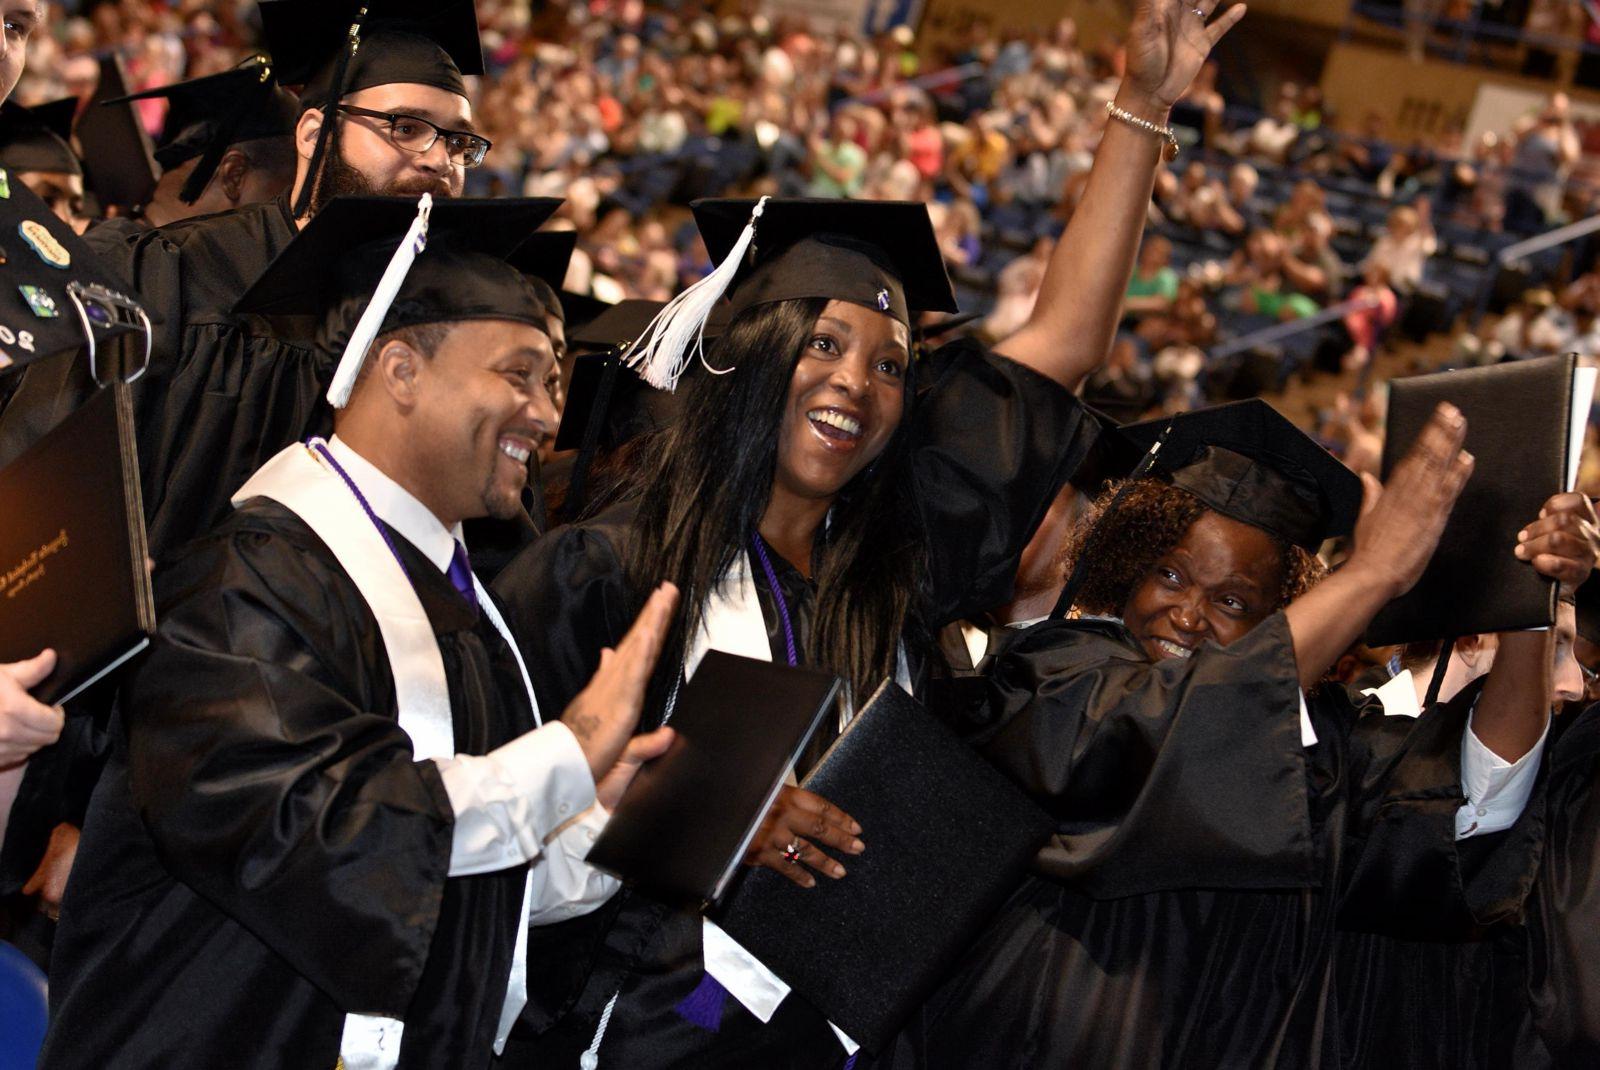 A forest green, hyperlinked, button labeled Technical Certificate of Credit in white, bolded, underlined text with an image of a crowded gathering of graduates and family focusing on four graduates wearing black graduate caps and gowns with white tassels and stoles: an African American female smiles while holding a black diploma/degree holder up with her left hand placed on the side, to her left an African American female smiles and raises her right hand wearing a metal bracelet while holding her black degree/diploma holder in her left hand, an African American male stand smiling and holding his black diploma/degree holder in his right hand with his left hand held up behind it, and a Caucasian male with a  black beard and glasses stands behind and to the right of those three.